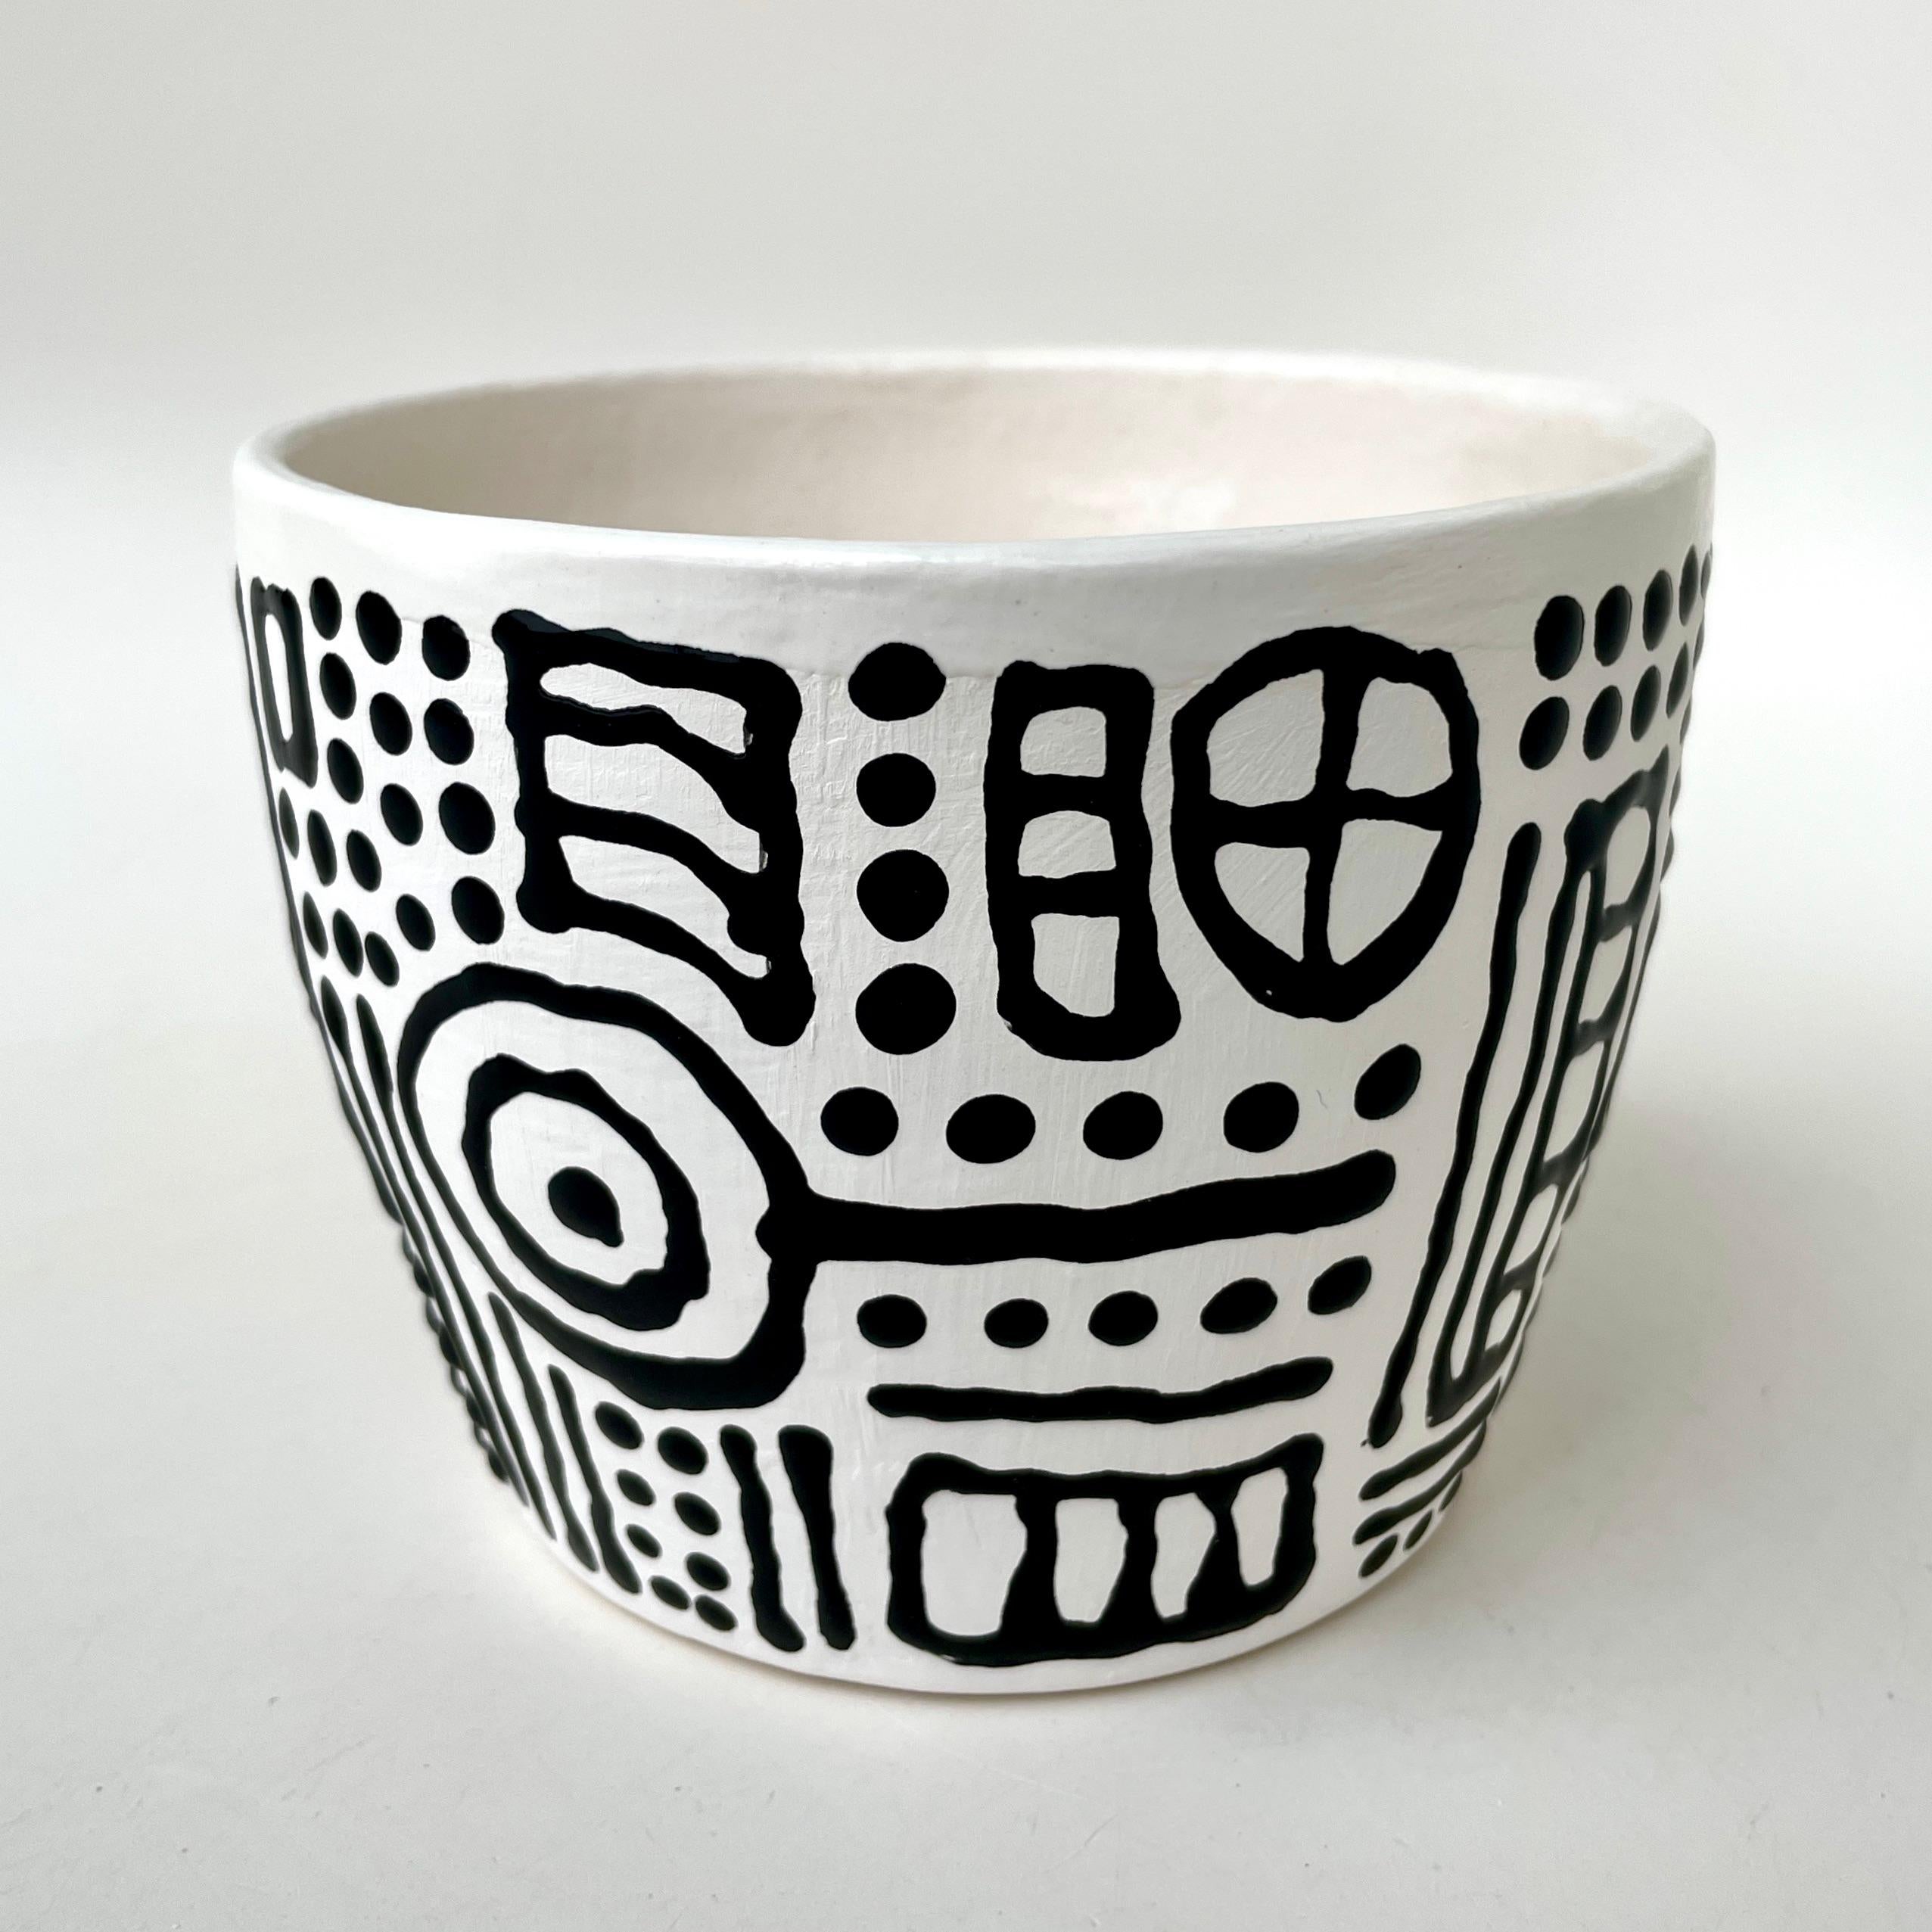 Contemporary La Mola Tumbler, Handmade and Food Safe, by Artist Stef Duffy For Sale